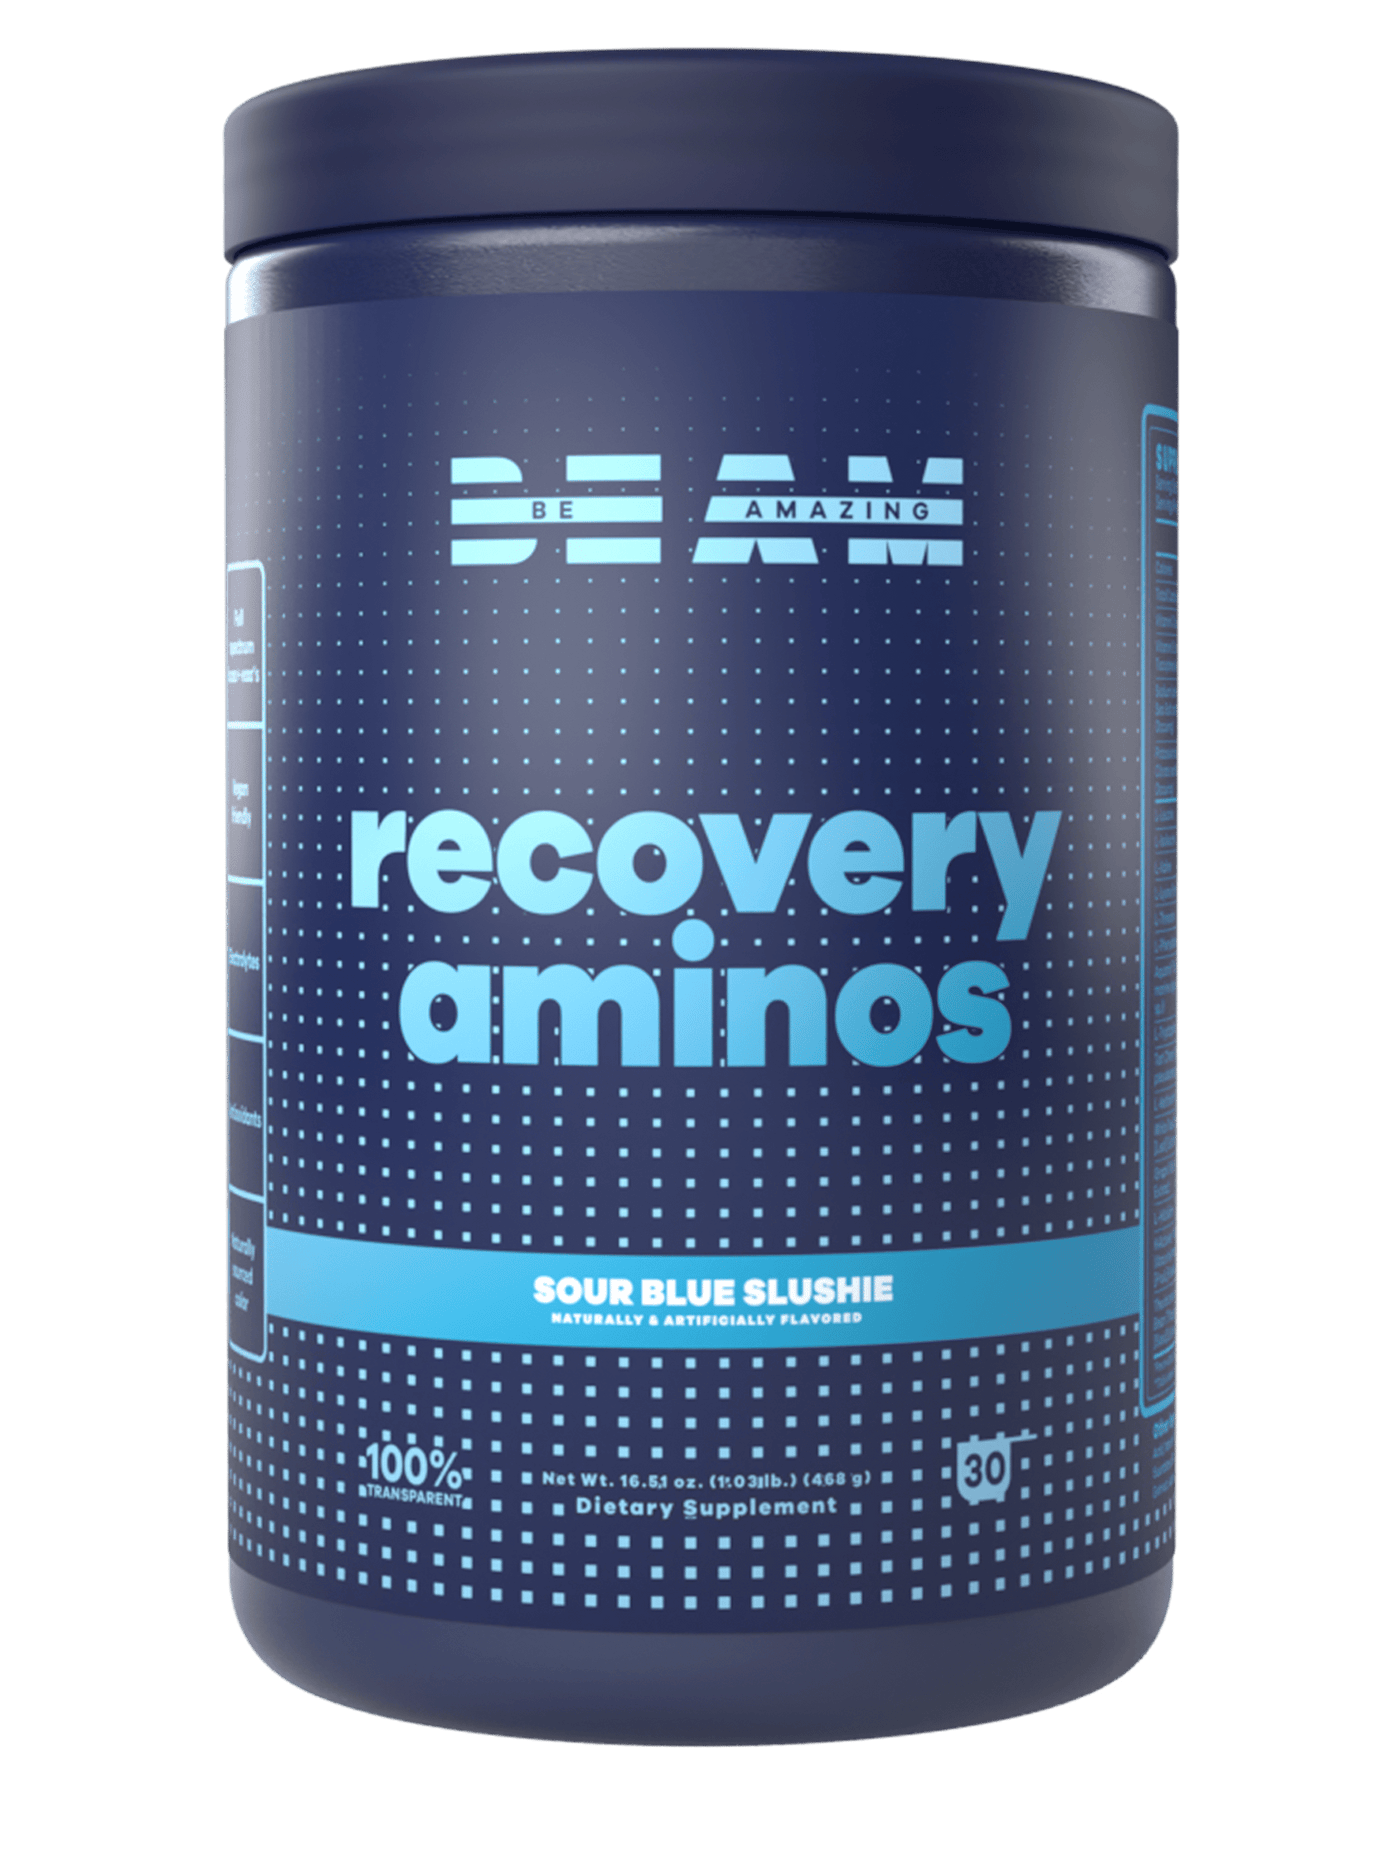 beam be amazing recovery aminos# 30 Servings / Sour Blue Slushie